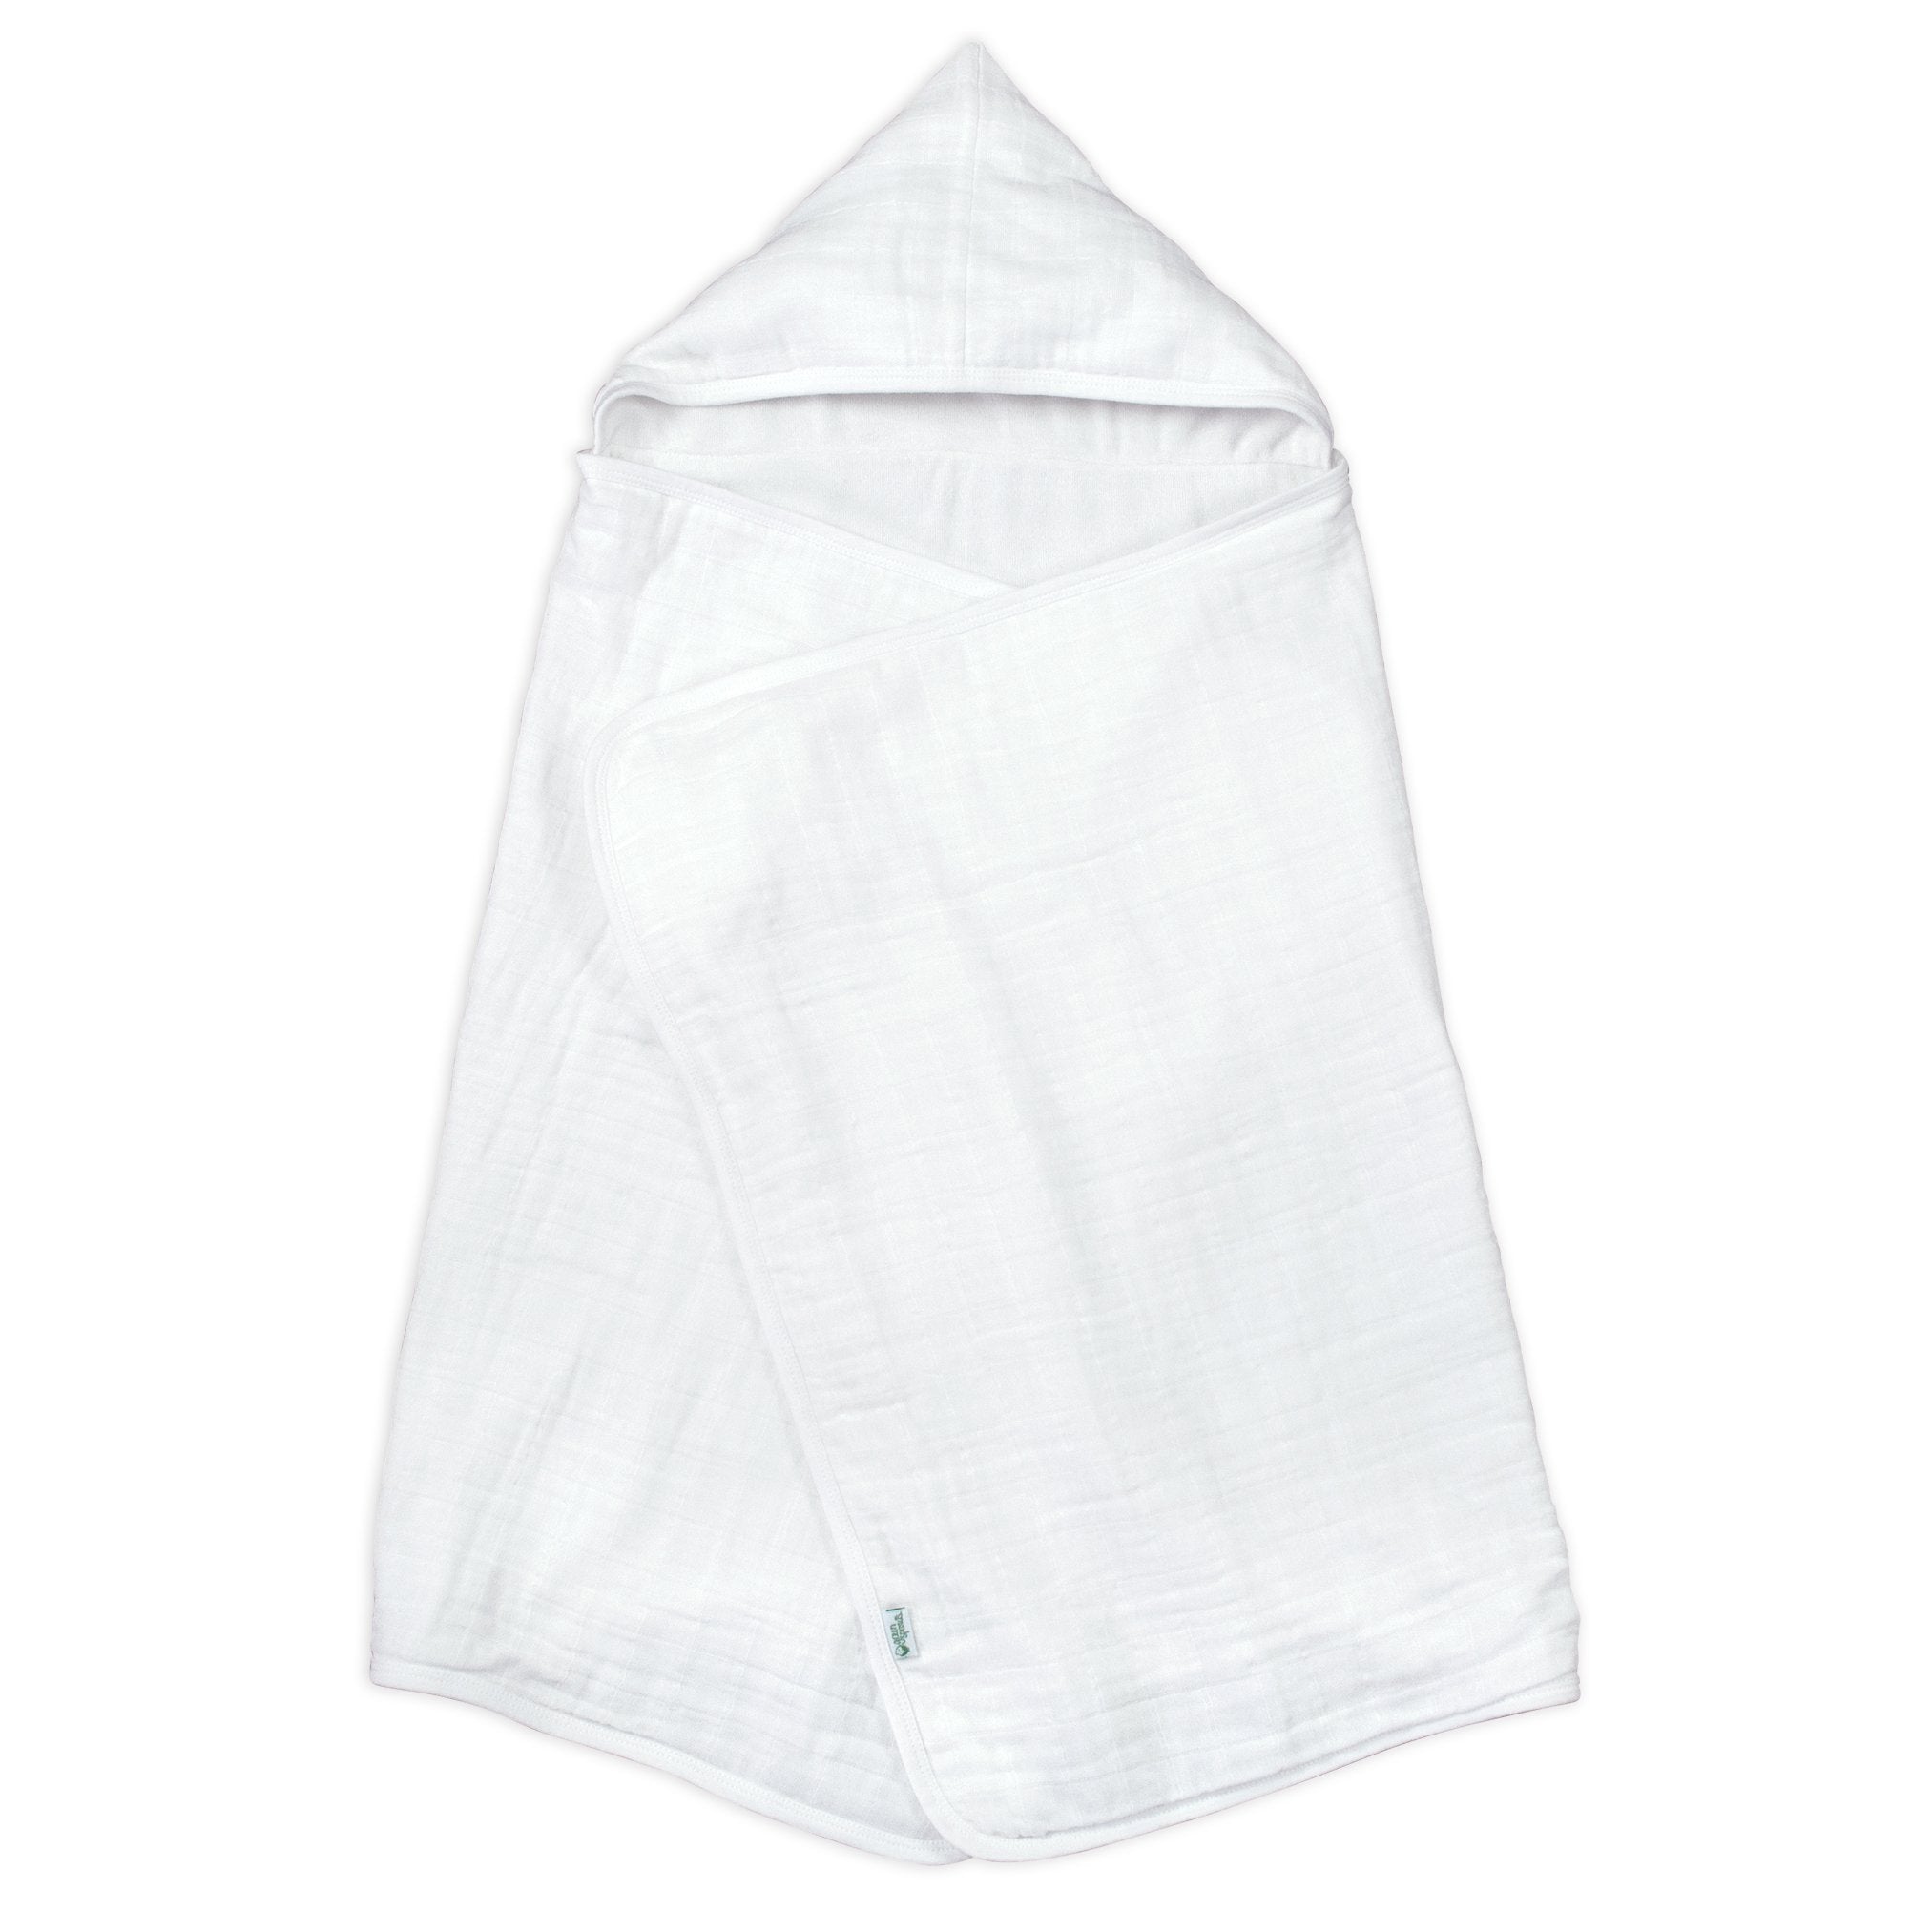 Muslin Hooded Towel Made From Organic Cotton - White - HoneyBug 